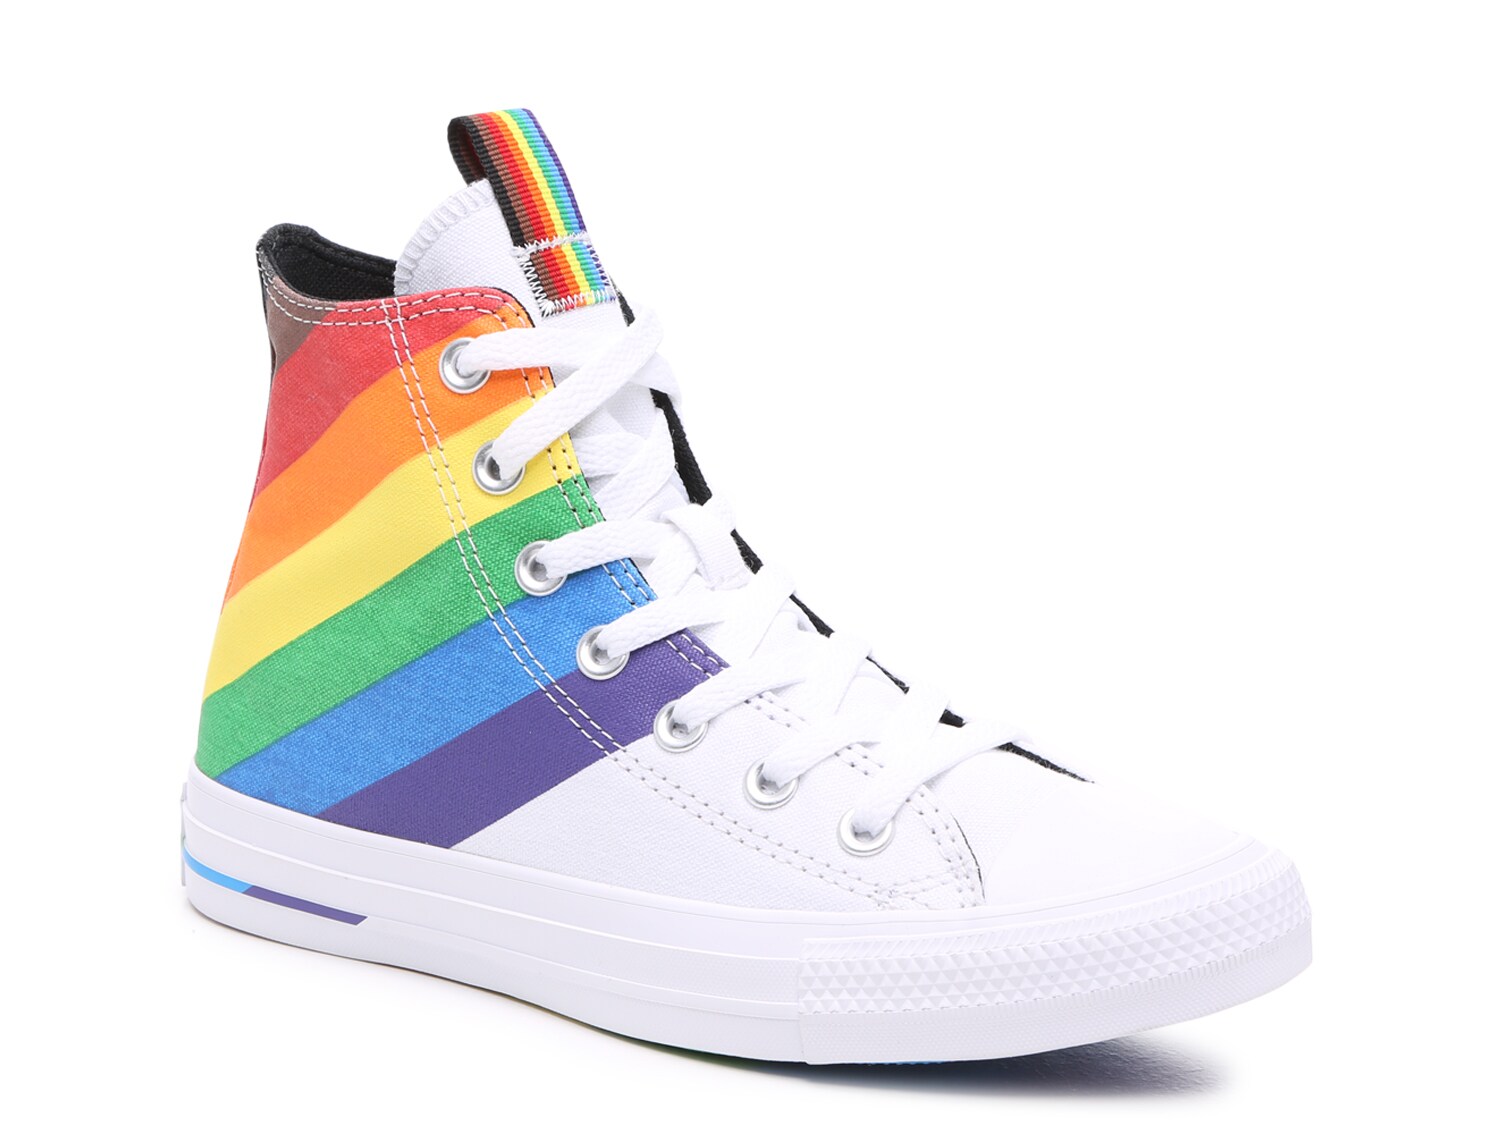 chuck taylor all star low top pride sneaker